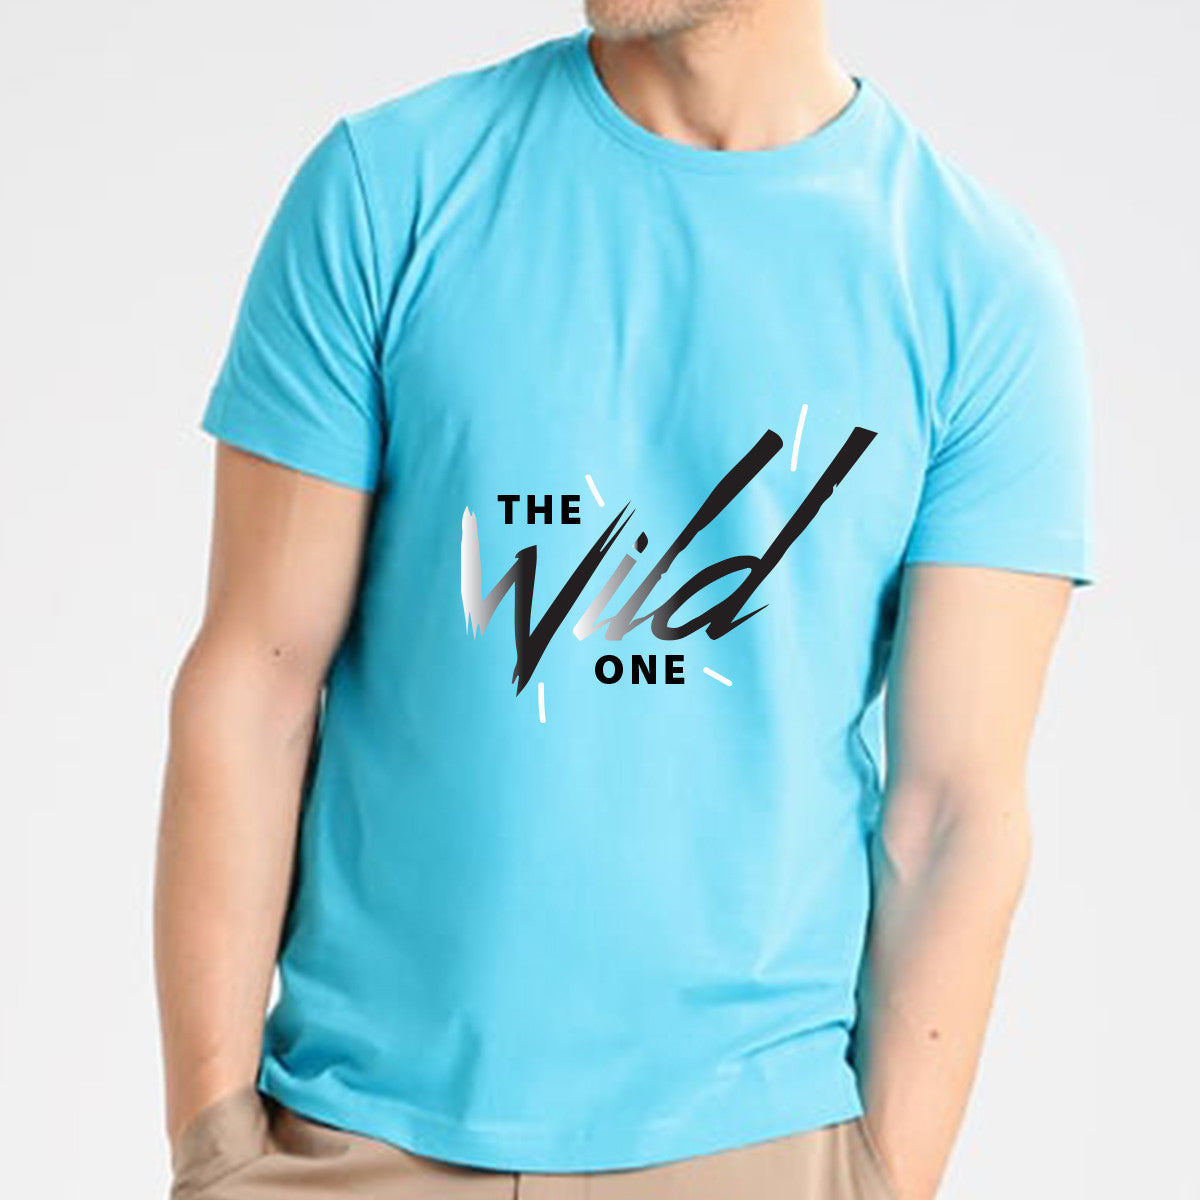 The Wild One T-shirt